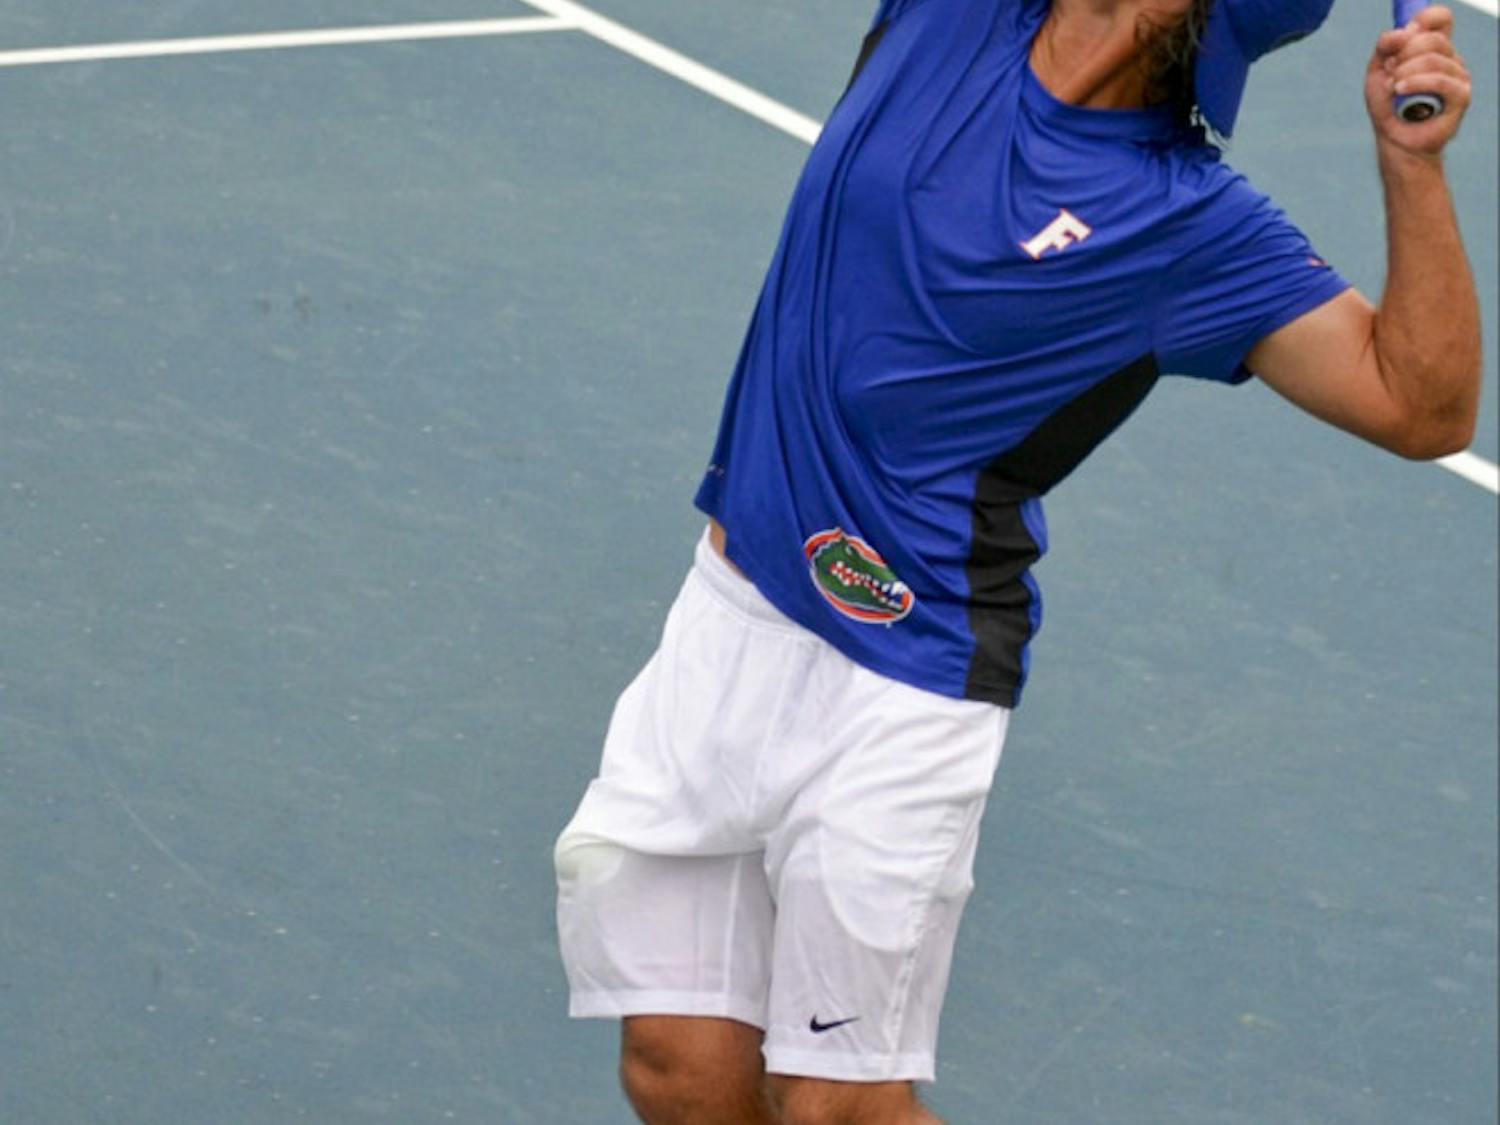 Diego Hidalgo prepares to serve during the SEC Fall Classic at UF's Ring Tennis Complex